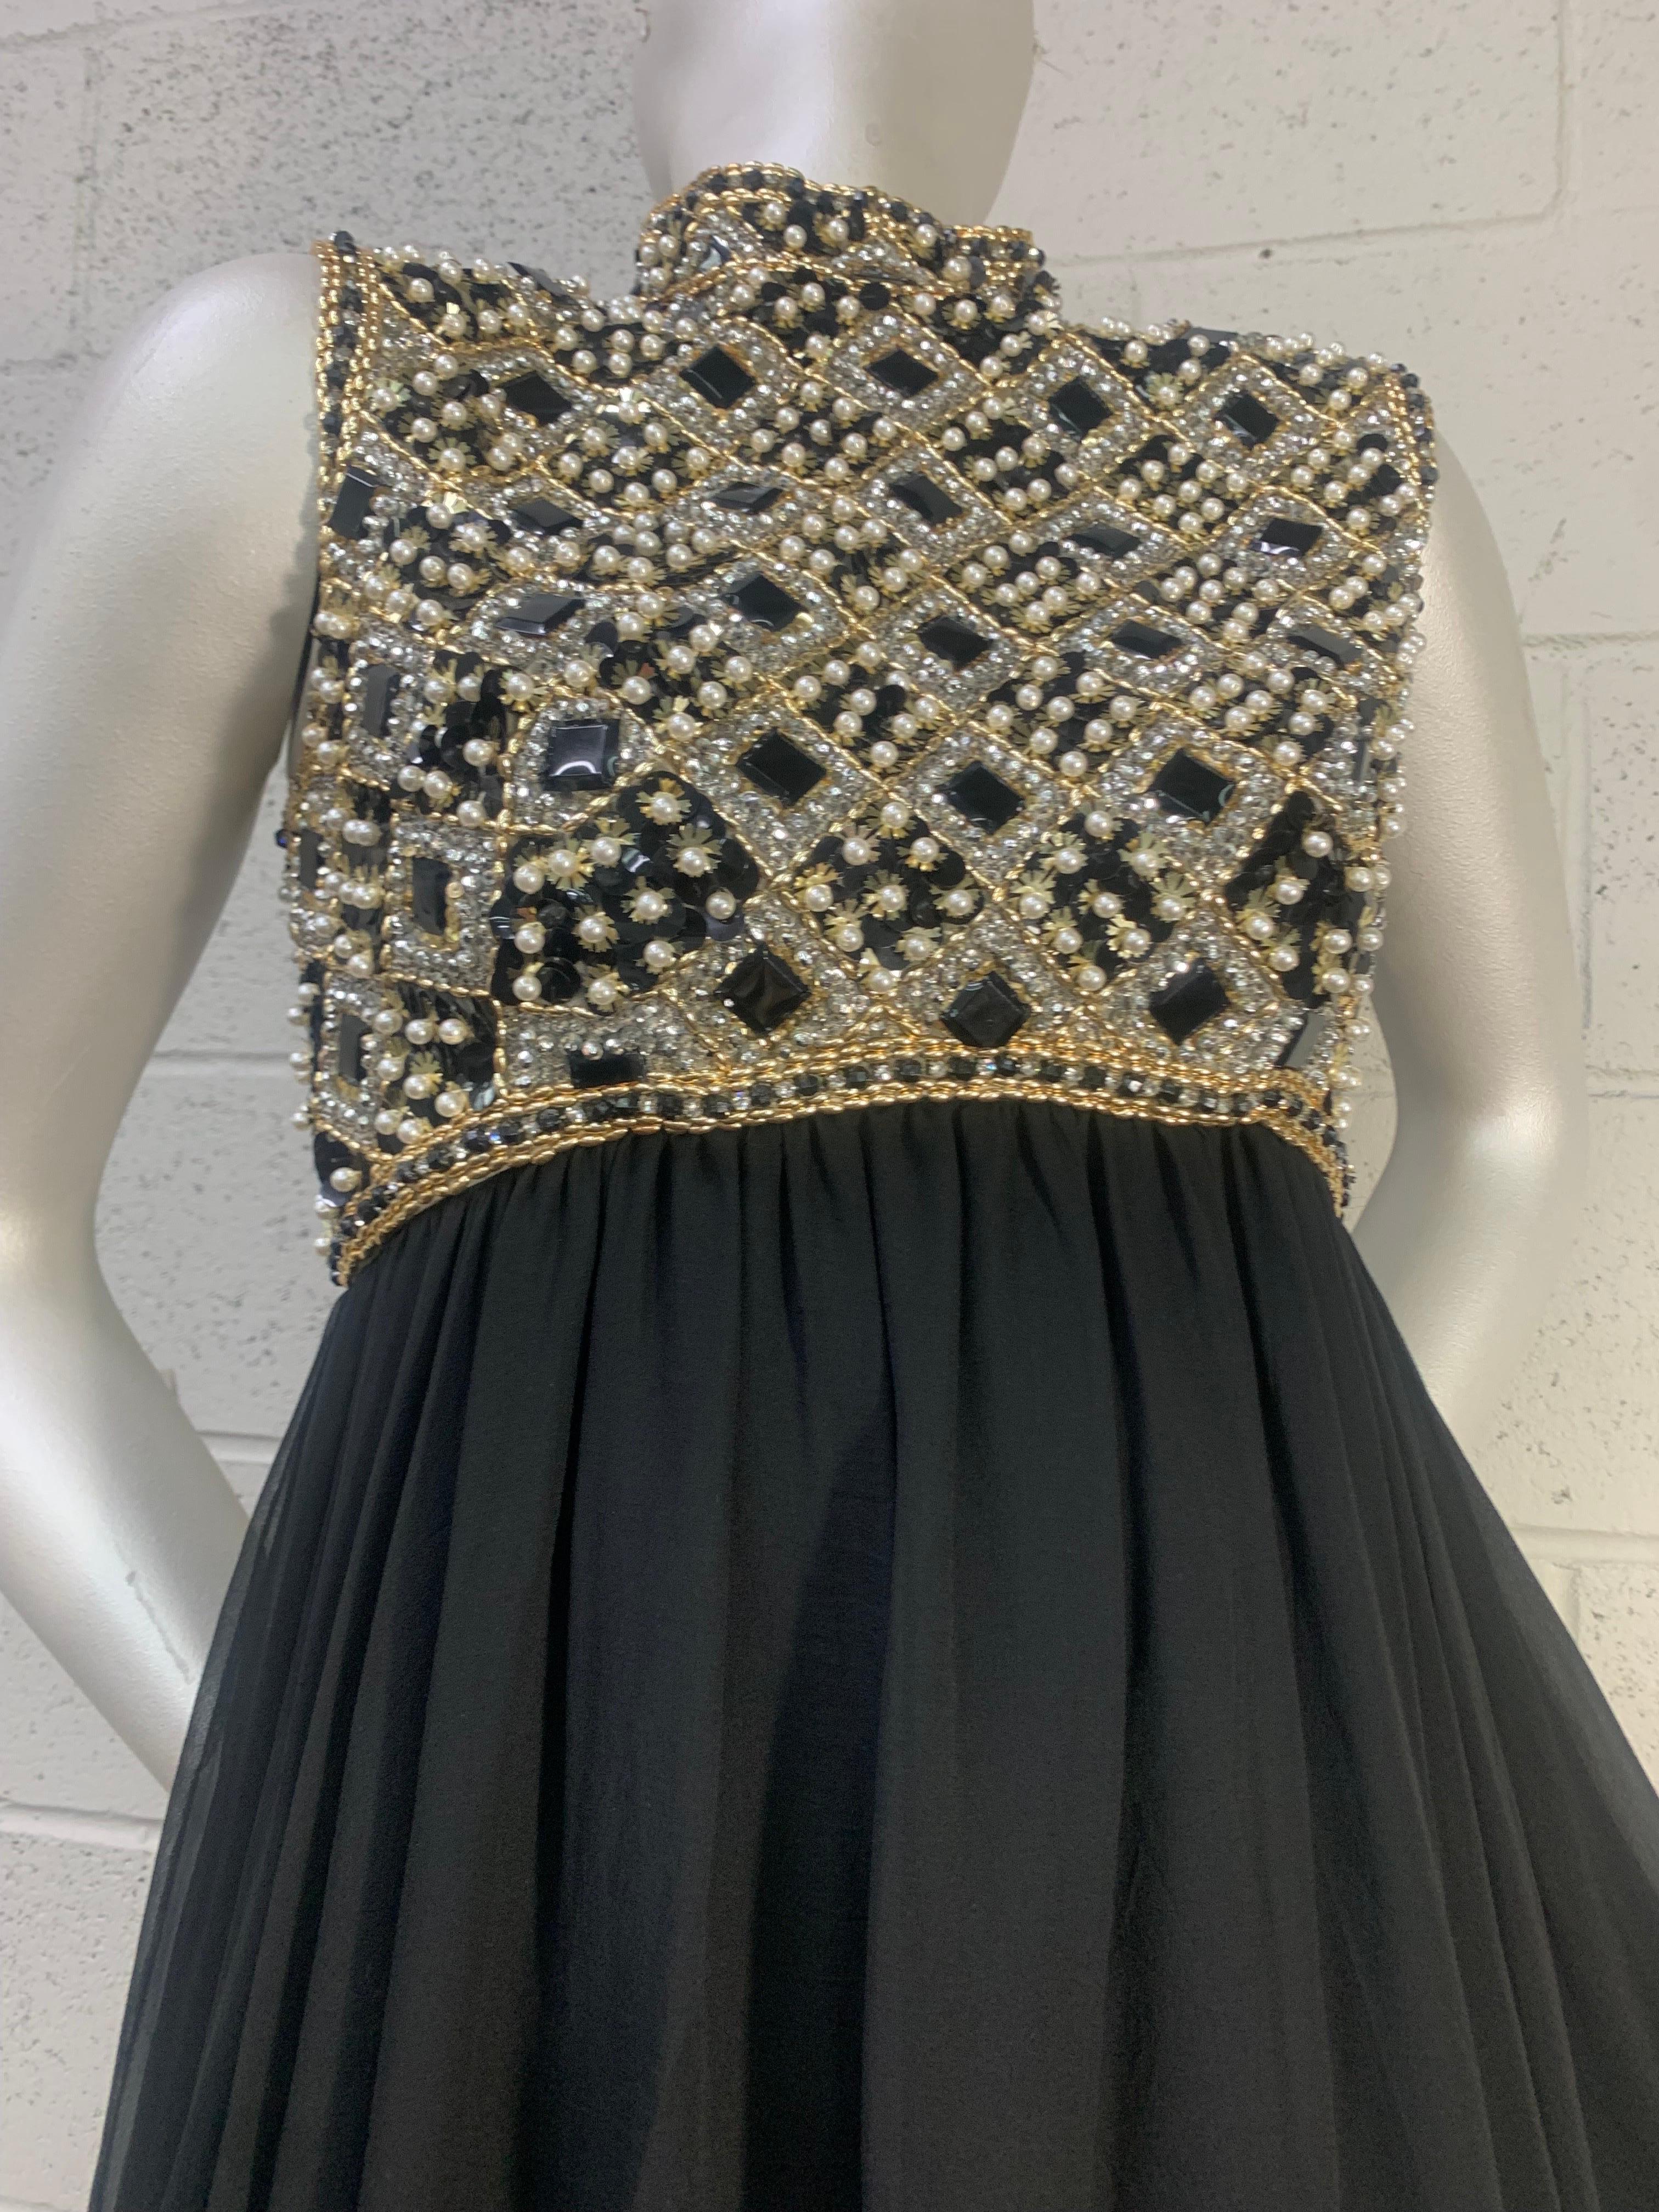 1960s Victoria Royale Ltd. Beaded Sequined Empire Mod Cocktail Dress in Black In Excellent Condition For Sale In Gresham, OR